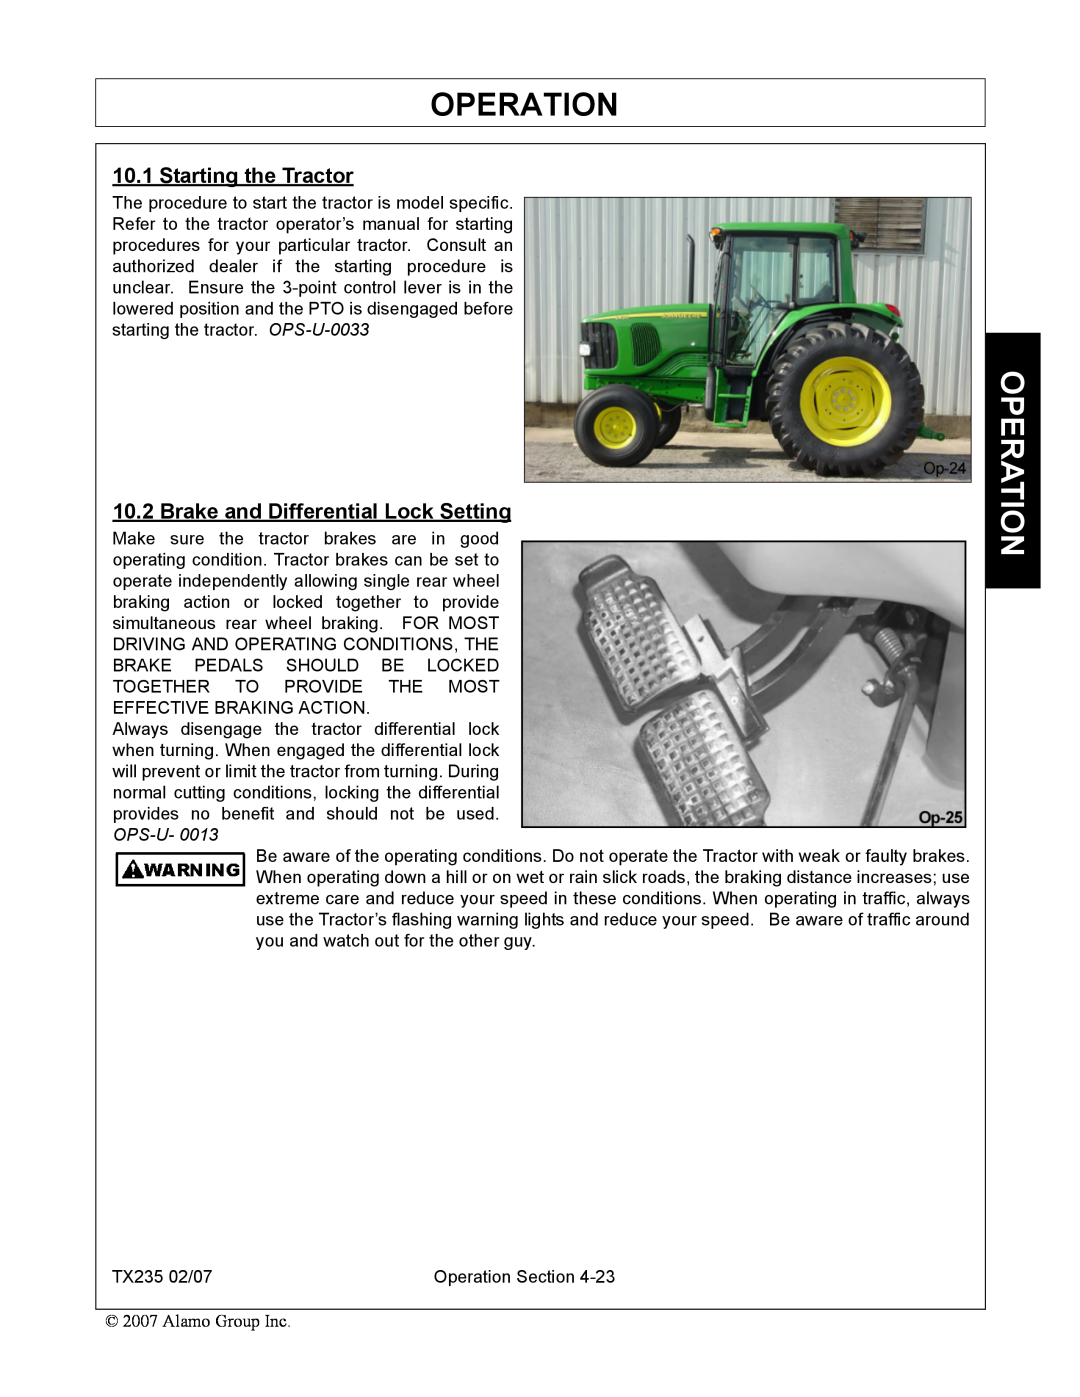 Alamo TX235 manual Starting the Tractor, Brake and Differential Lock Setting, Operation 